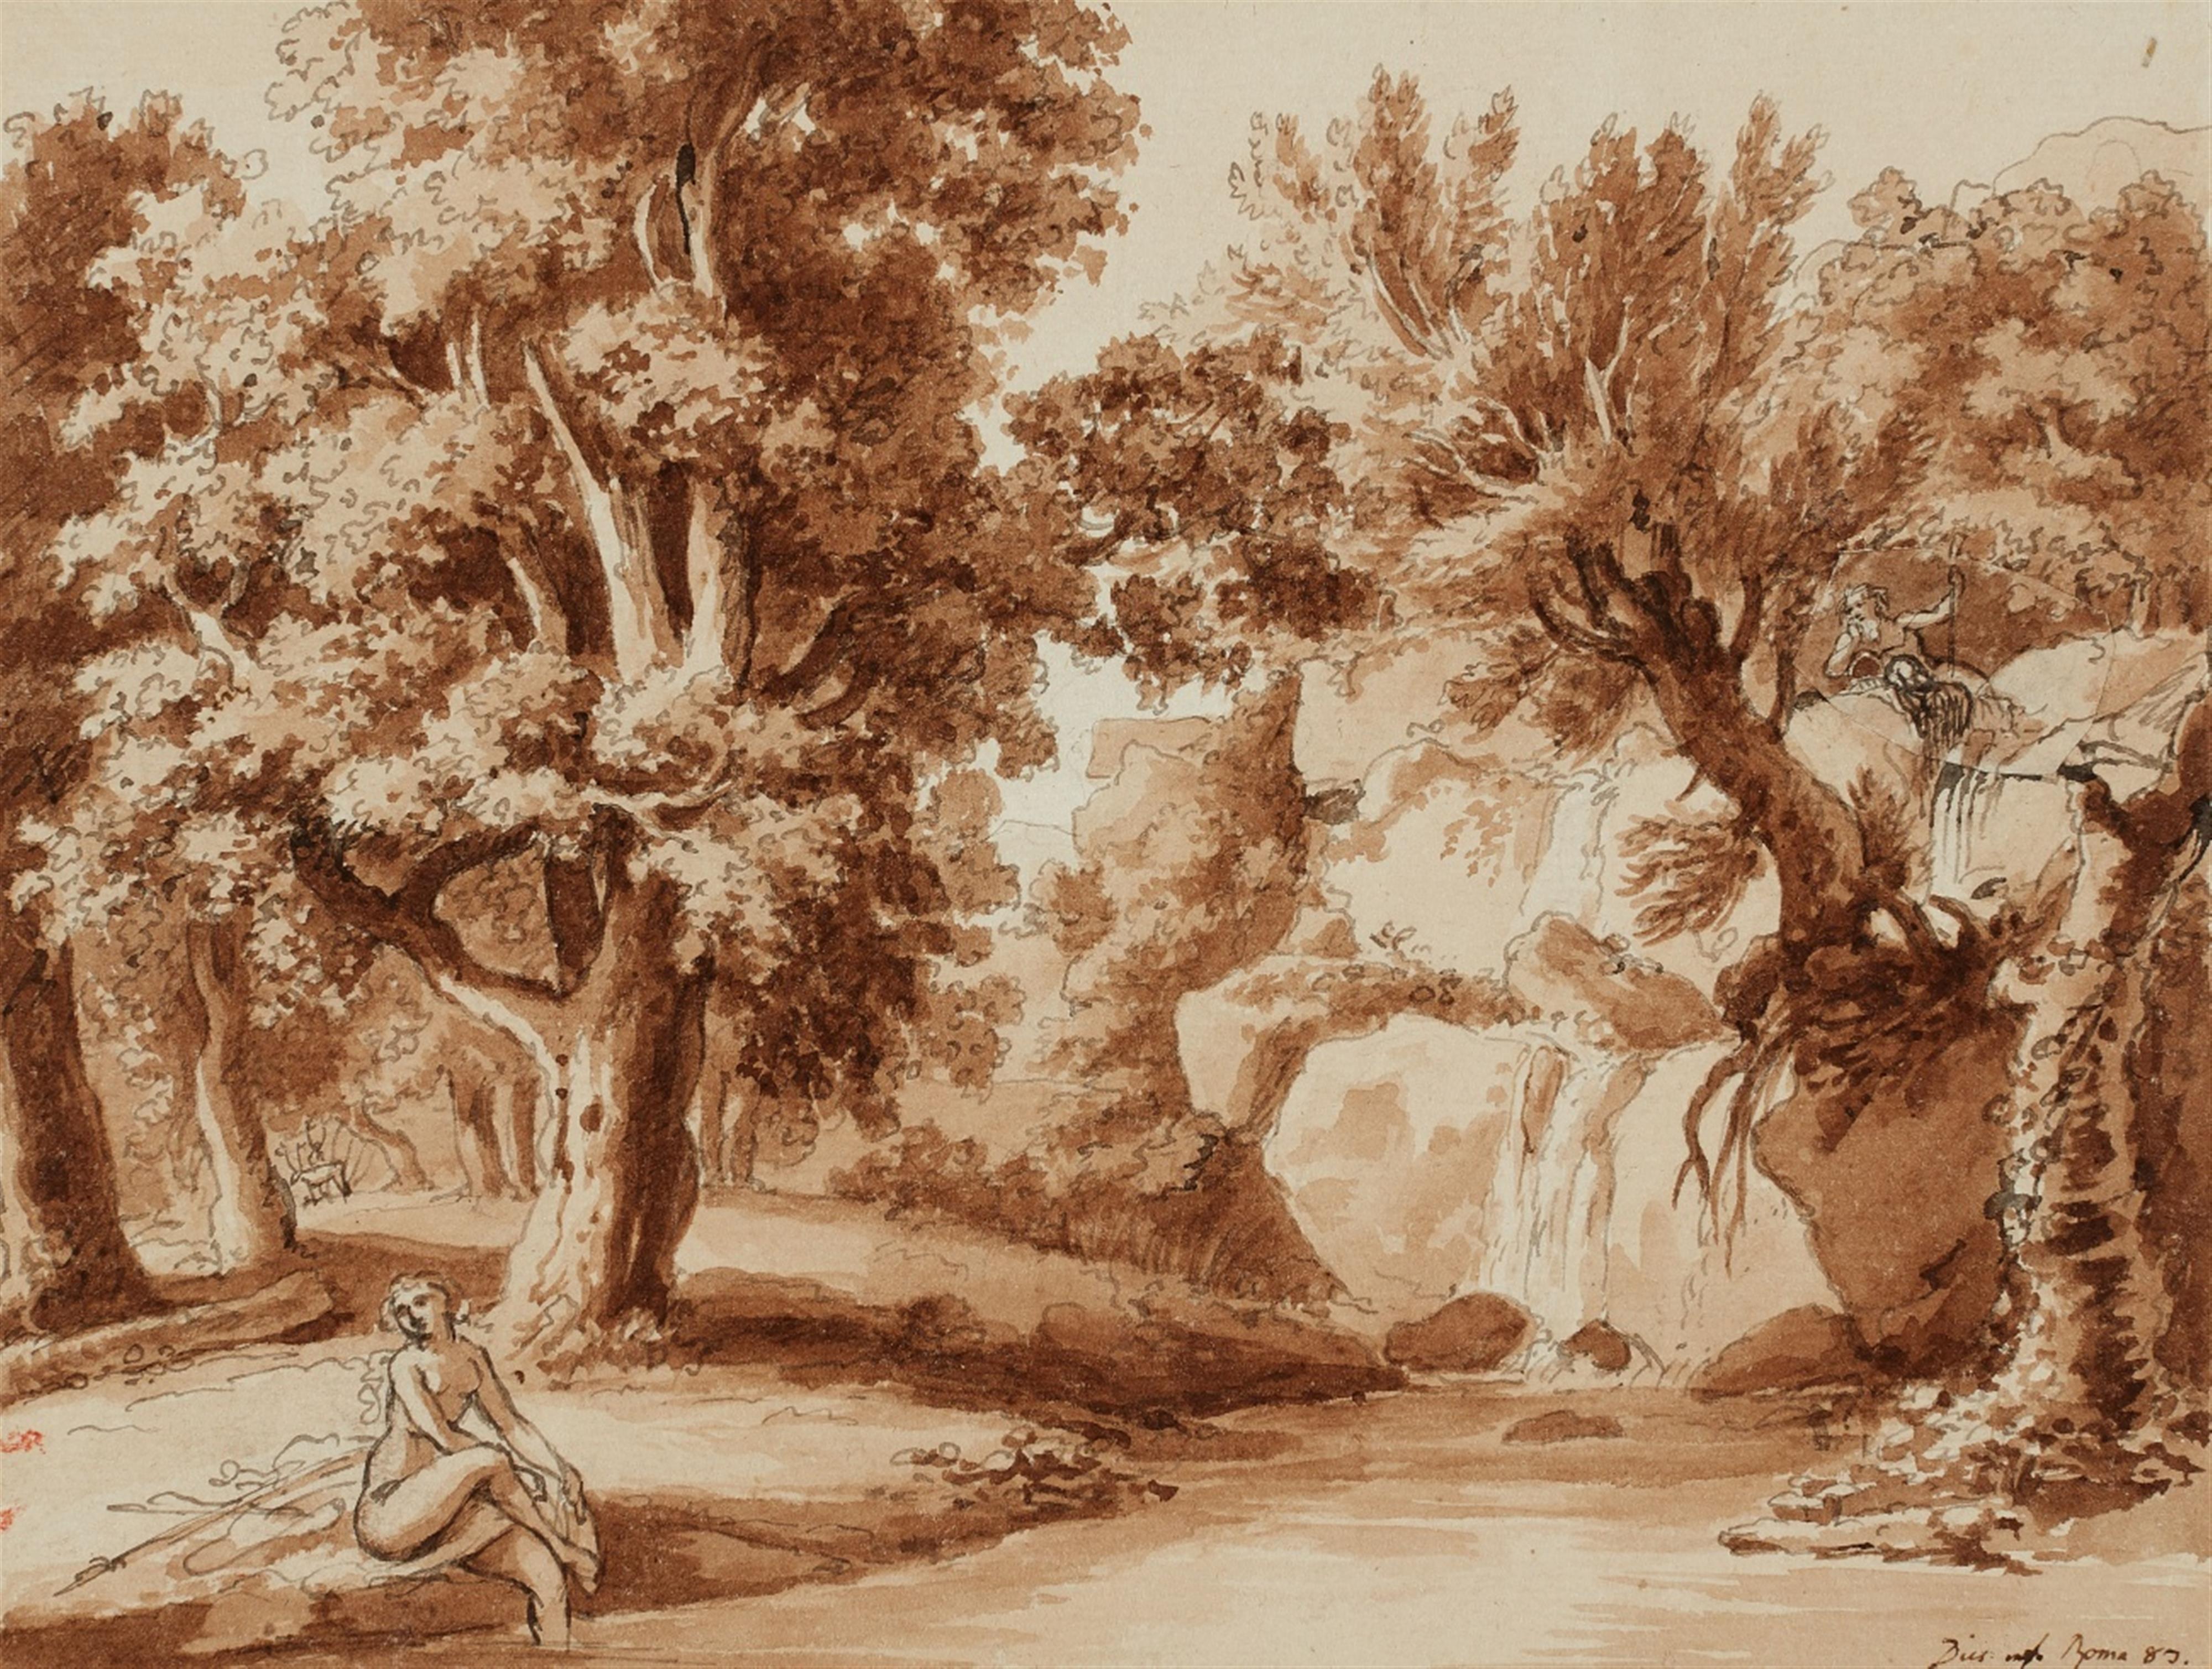 Albert Christoph Dies - Bathers in a Wooded Landscape - image-1